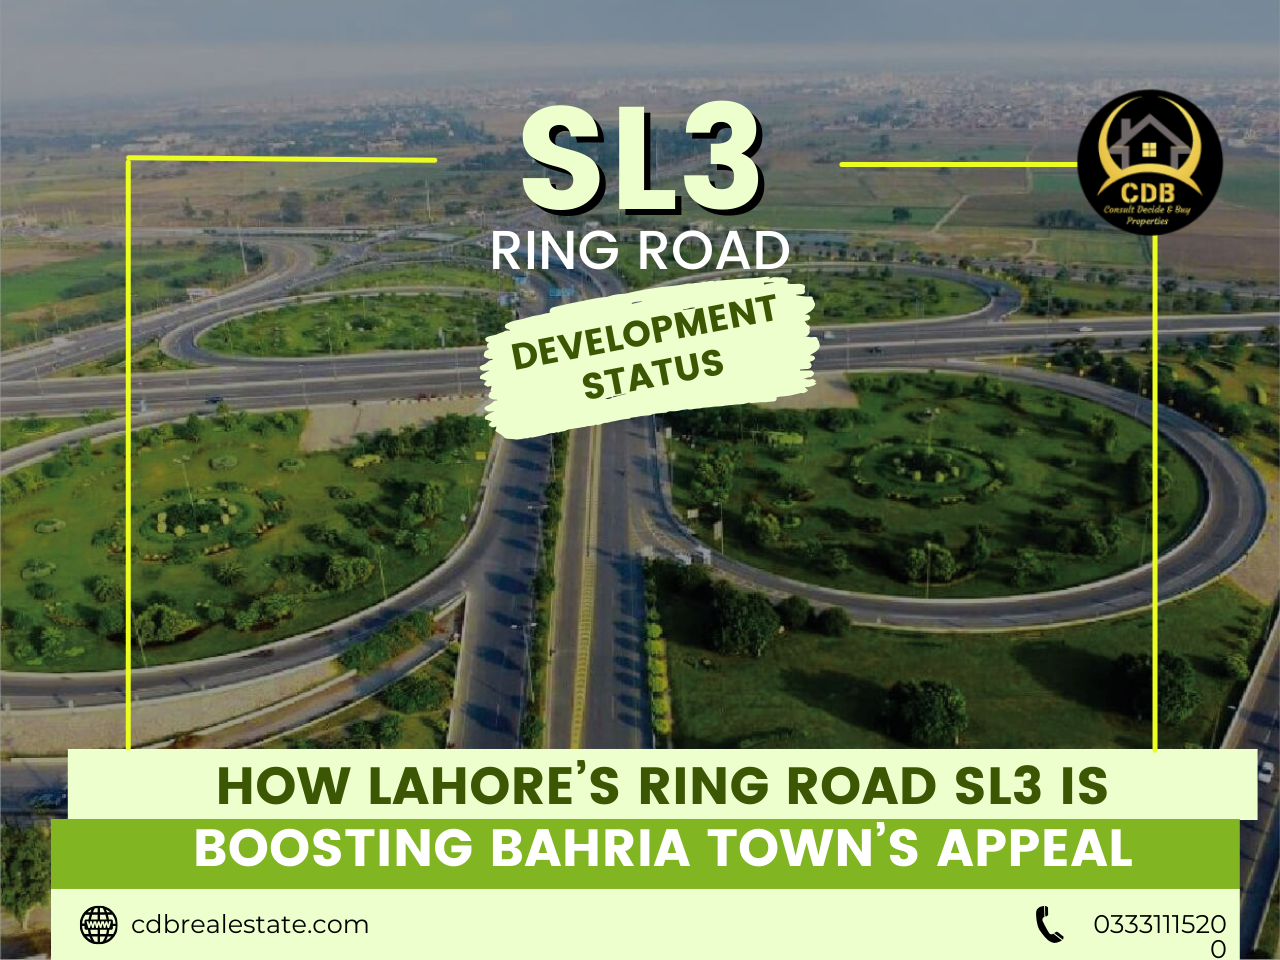 How Lahore’s Ring Road SL3 is Boosting Bahria Town’s Appeal